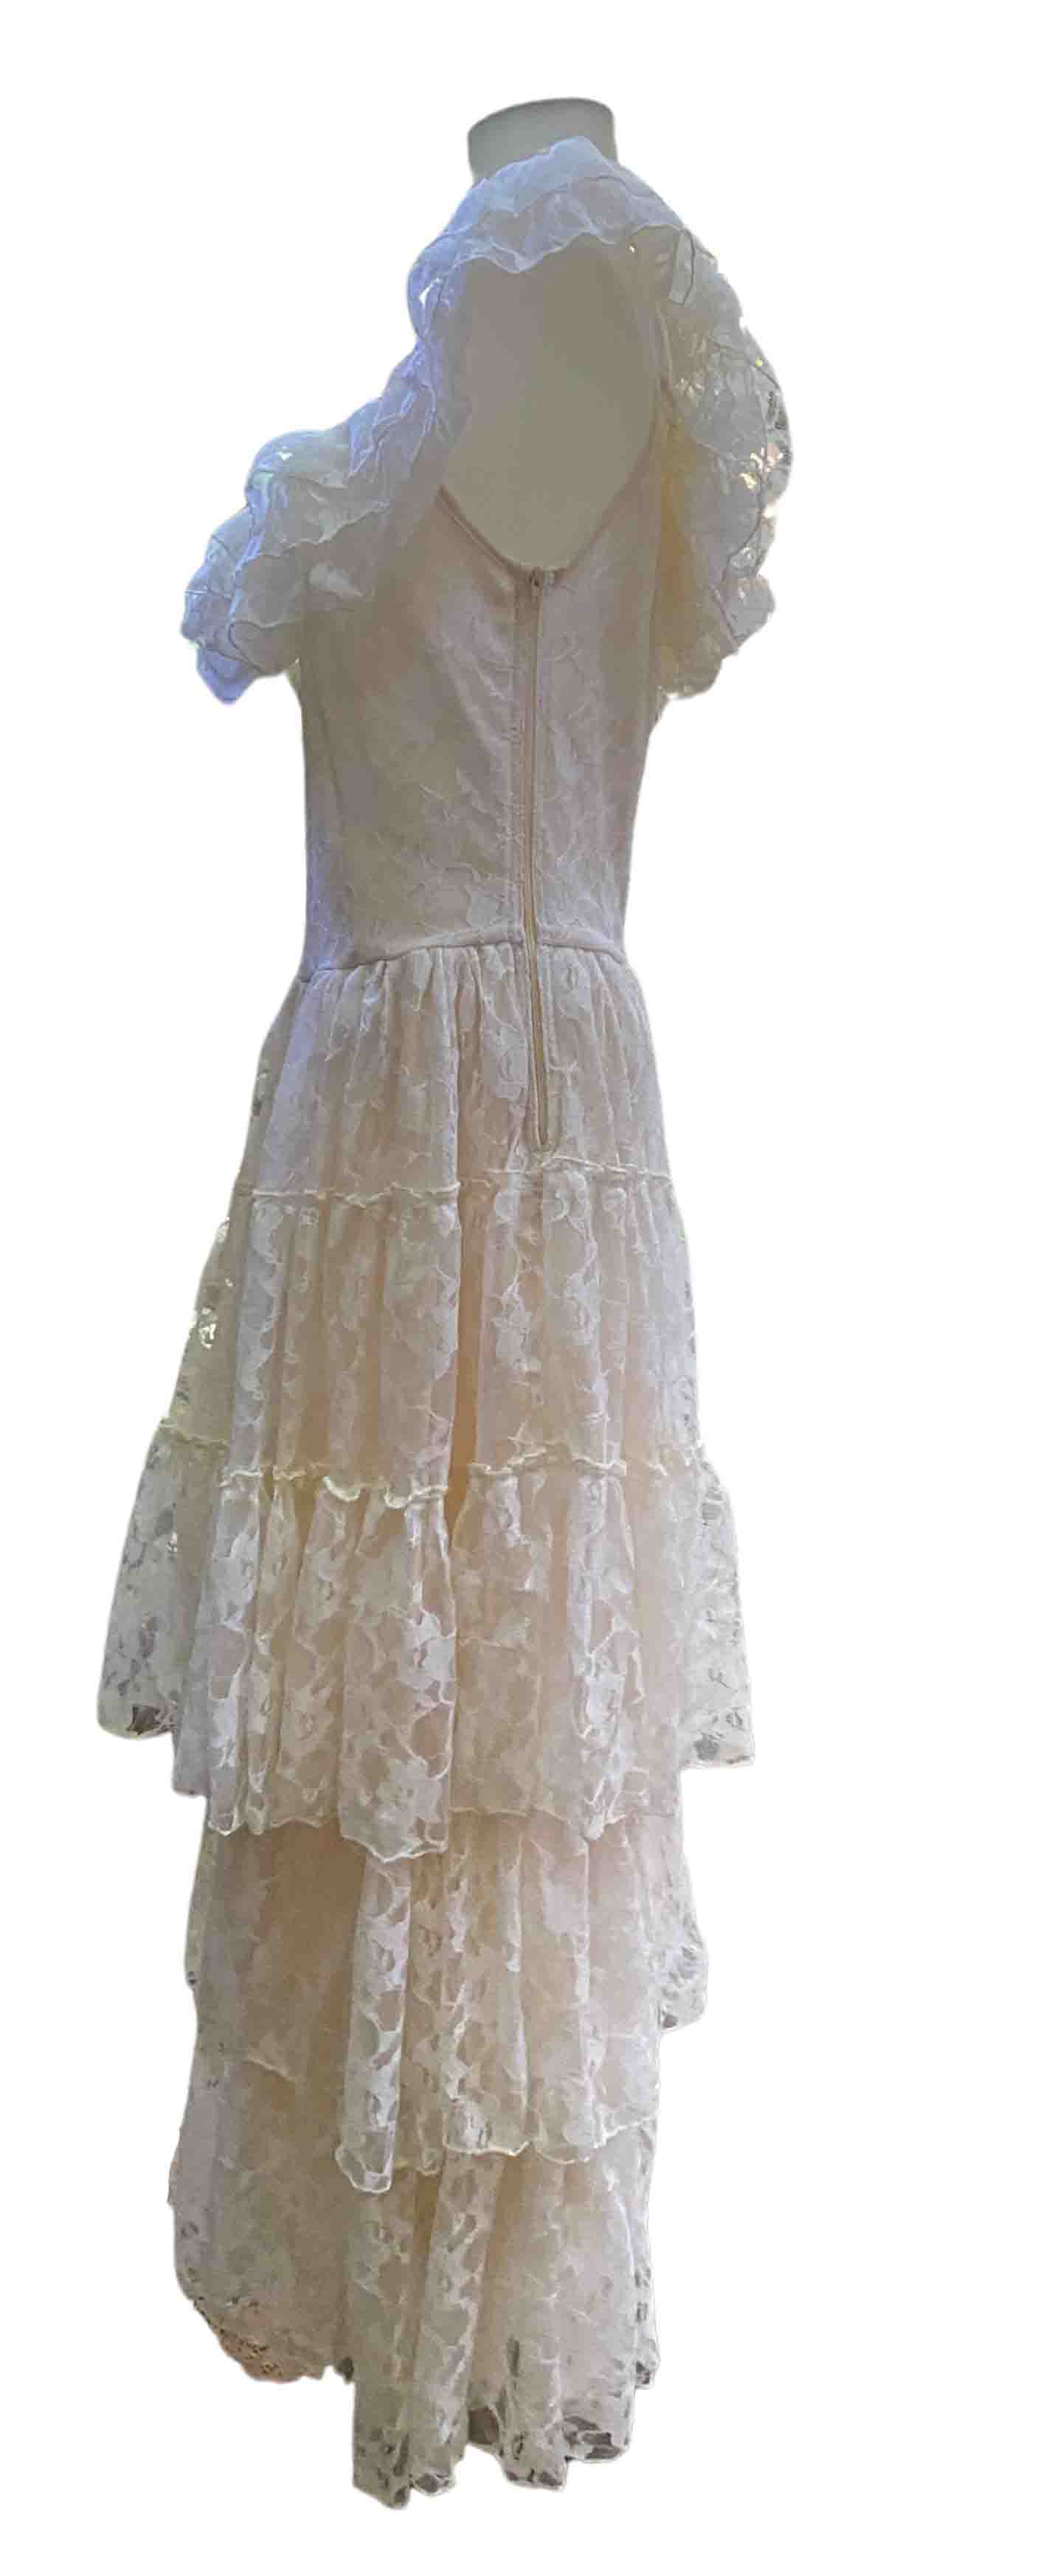 The cream Lace Wednesday Off Shoulder Dress, left side view.